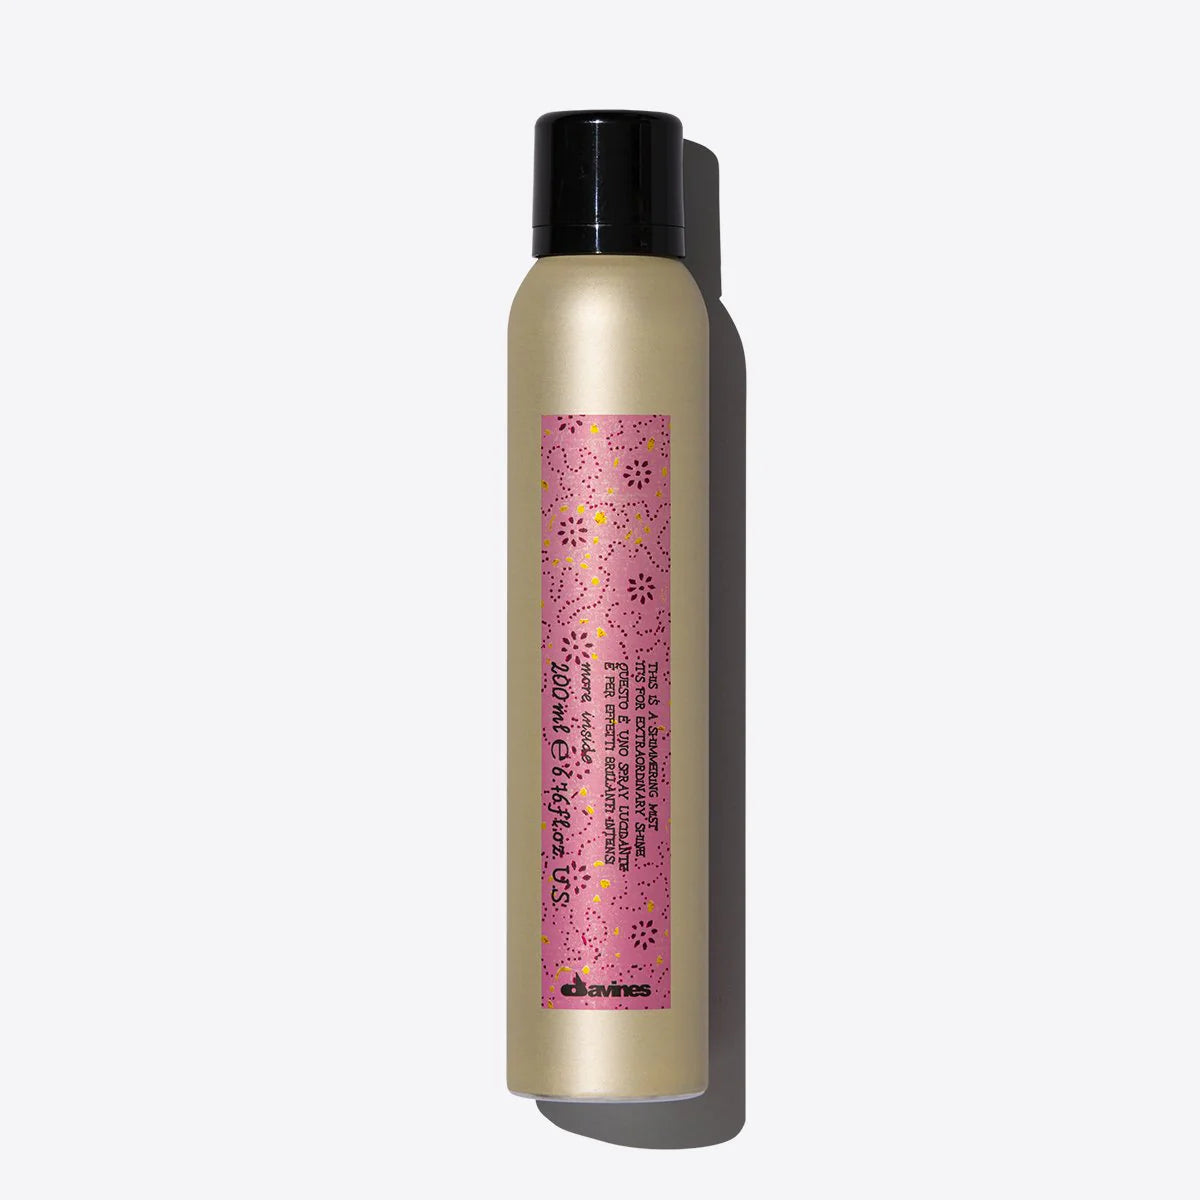 THIS IS A SHIMMER MIST